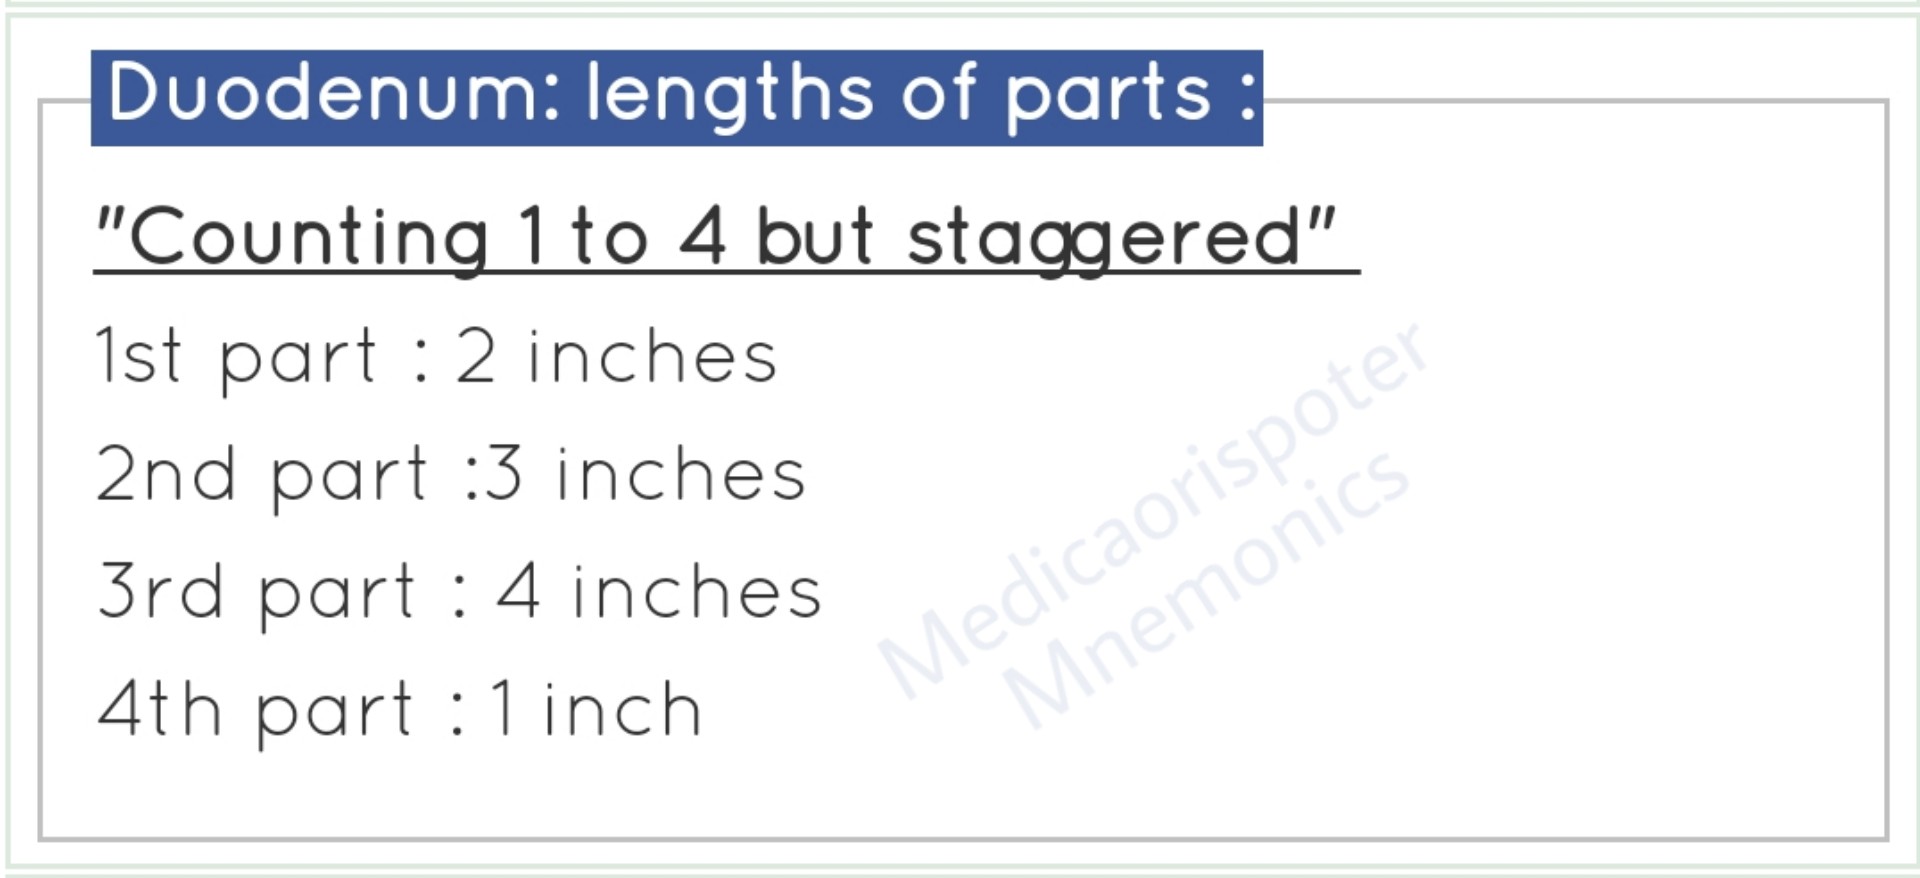 Lengths of Parts of Duodenum